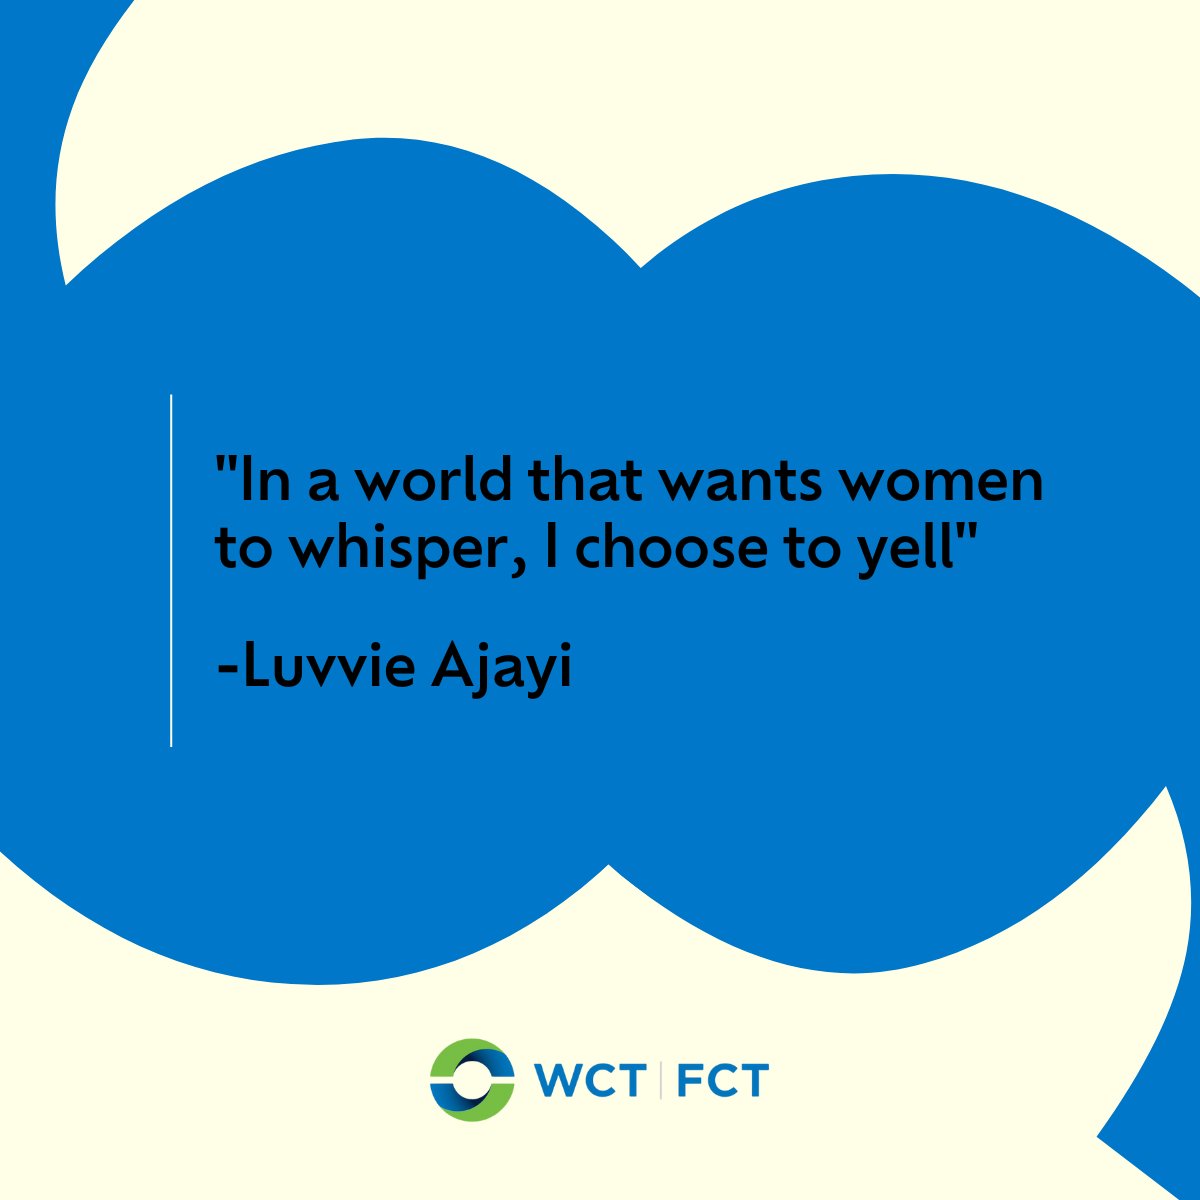 'In a world that wants women to whisper, I choose to yell' -Luvvie Ajayi